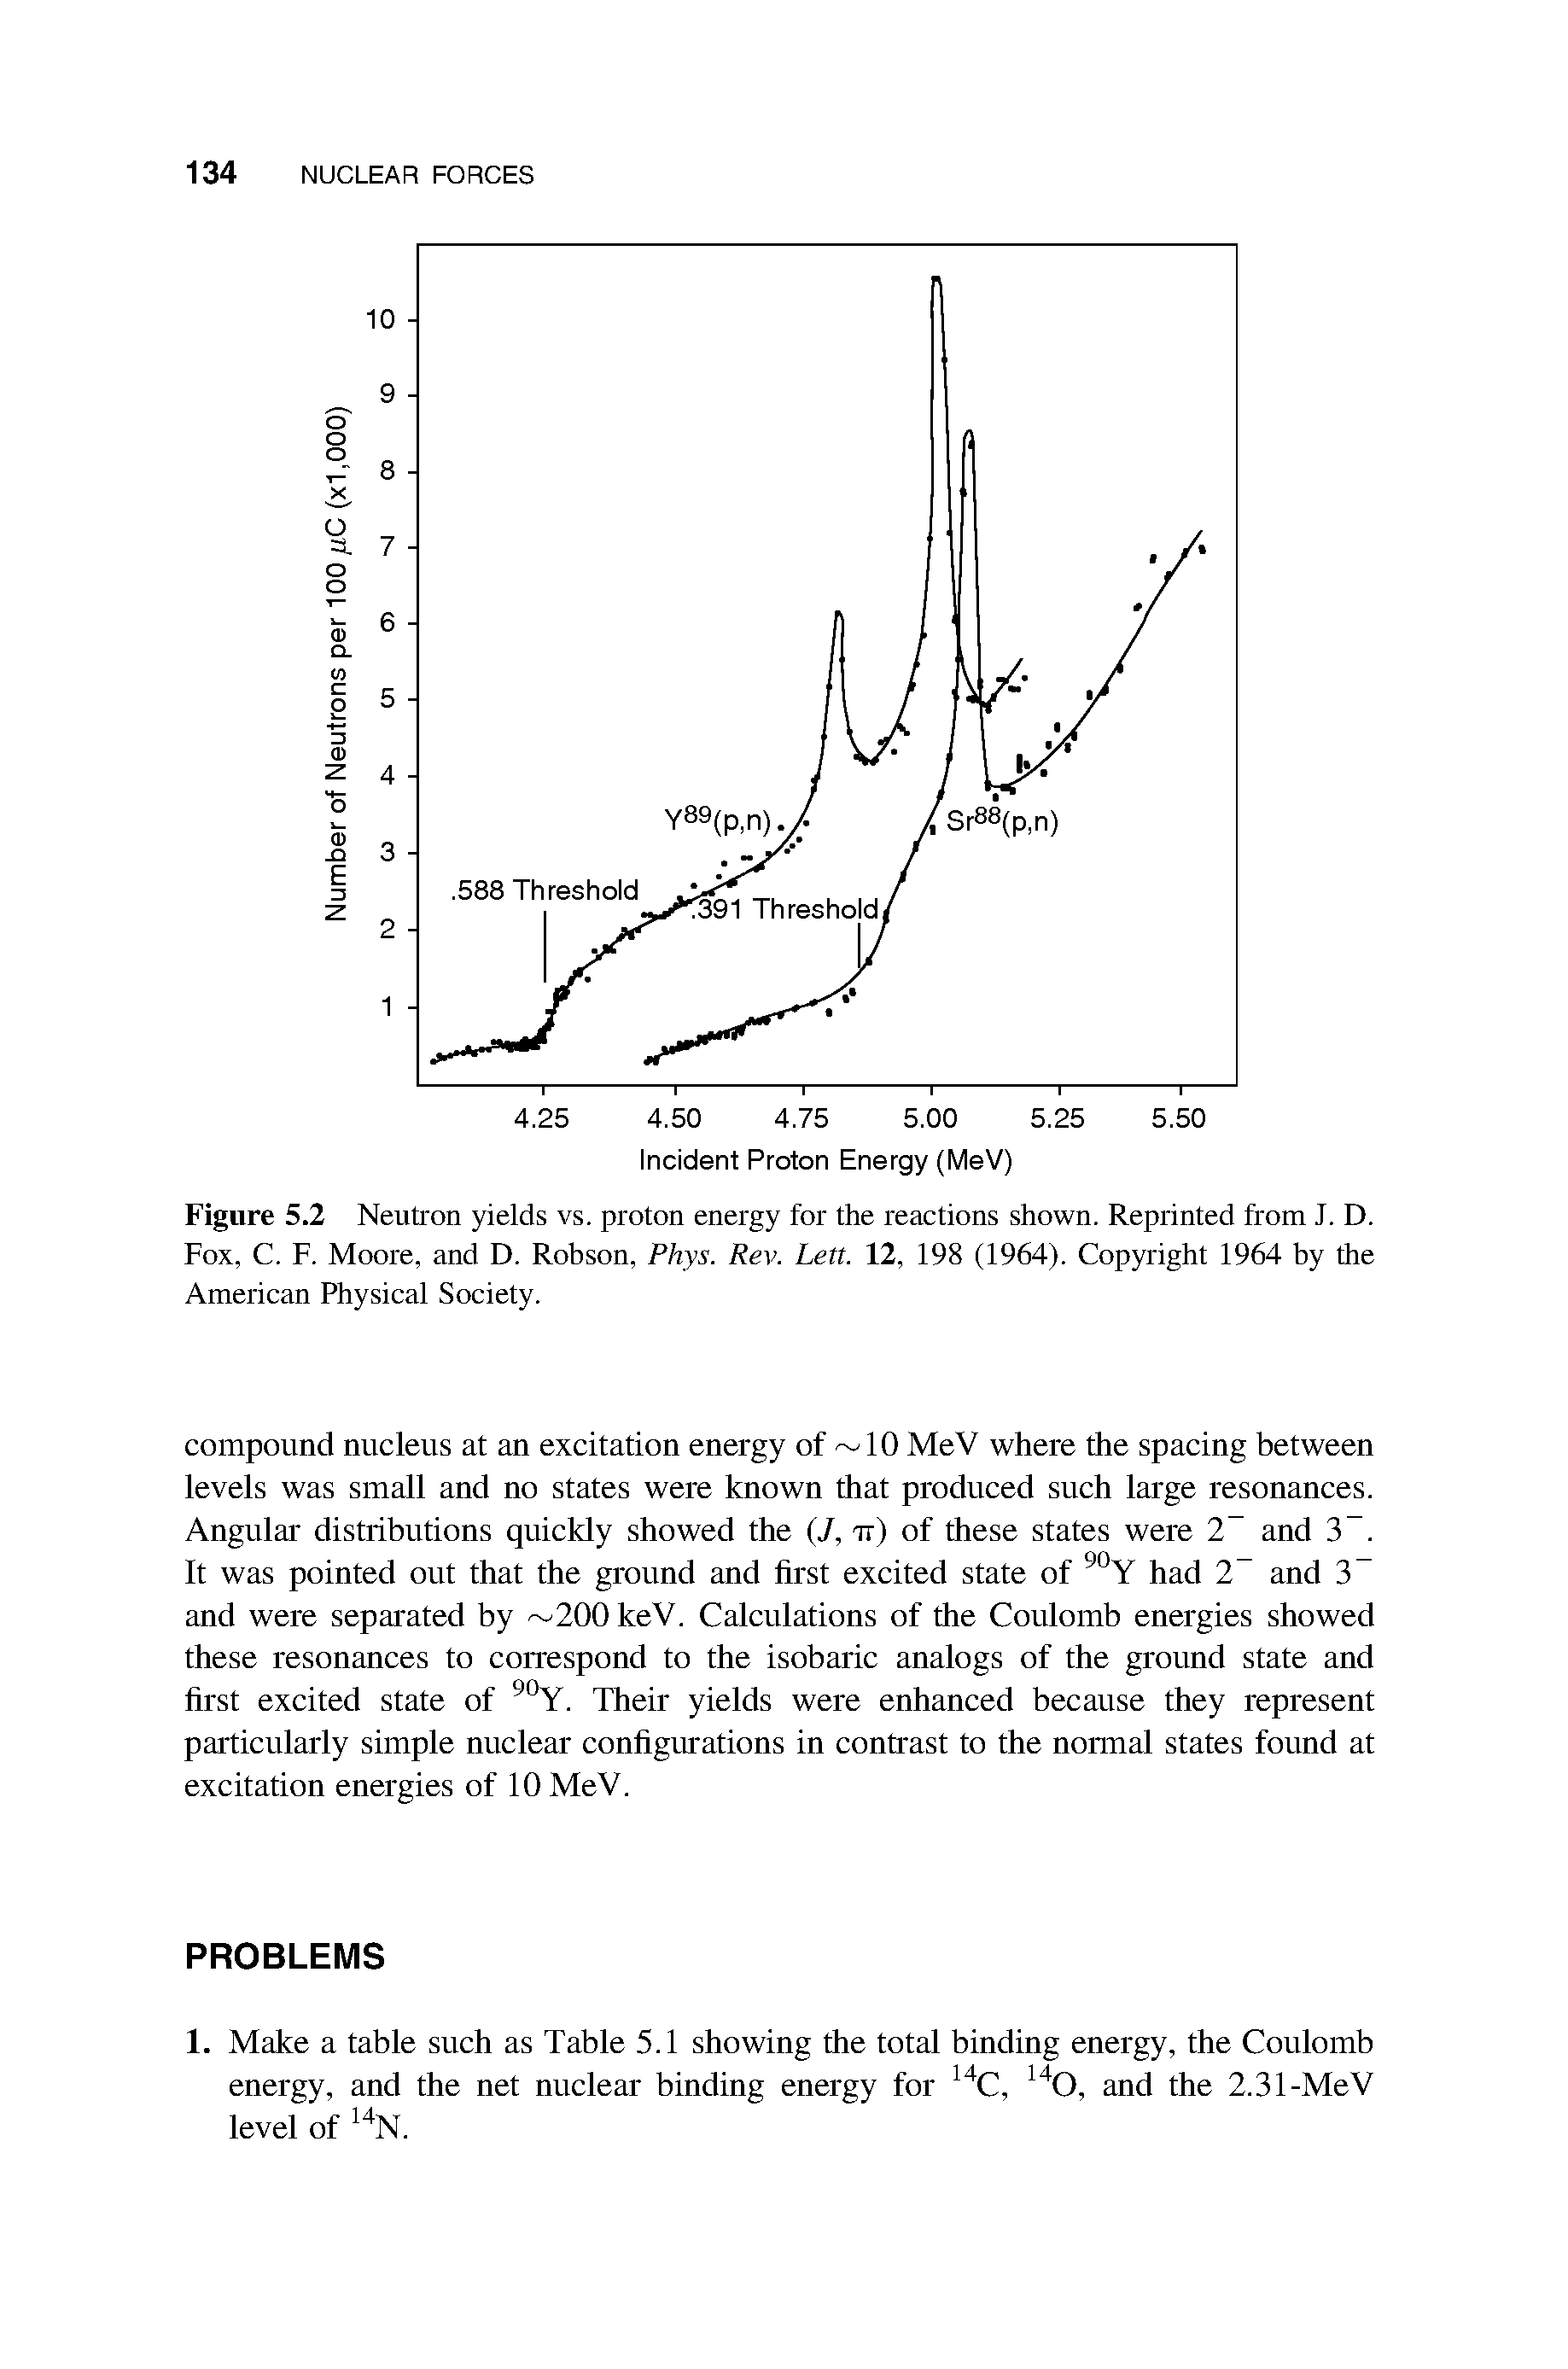 Figure 5.2 Neutron yields vs. proton energy for the reactions shown. Reprinted from J. D. Fox, C. F. Moore, and D. Robson, Phys. Rev. Lett. 12, 198 (1964). Copyright 1964 by the American Physical Society.